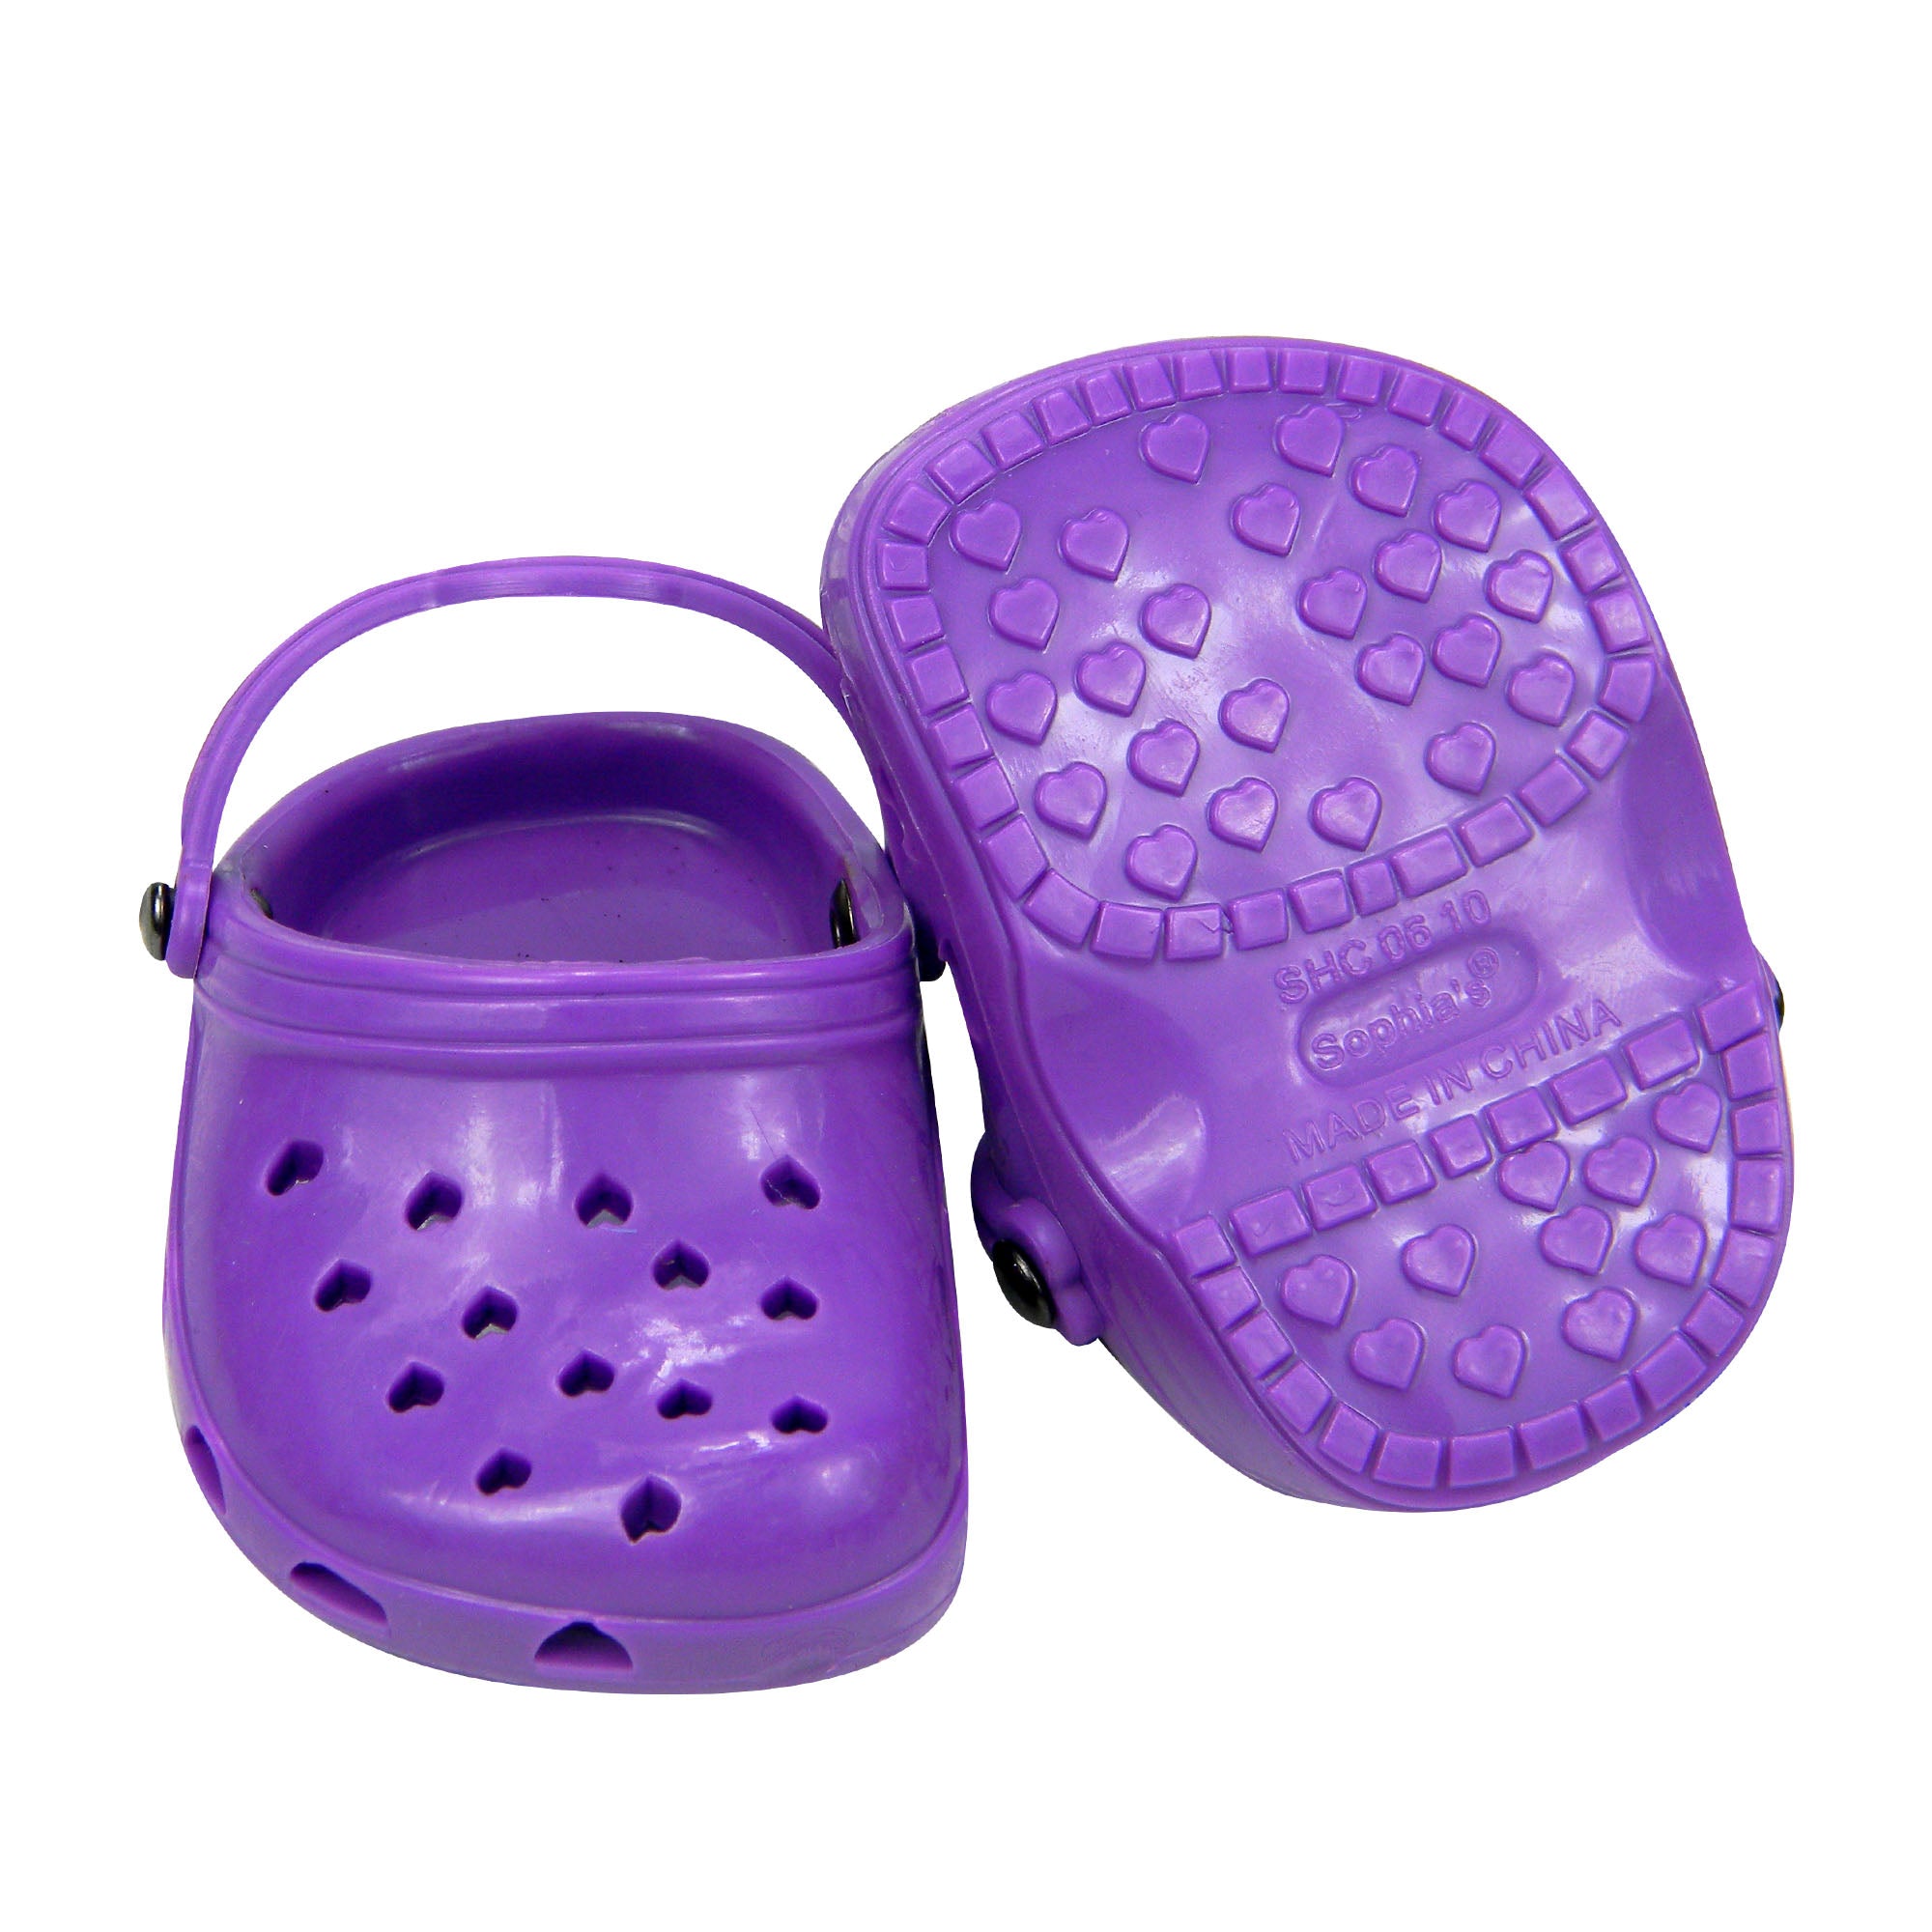 Sophia’s Set of 2 Purple and Teal Garden Clog Shoe for 18" Dolls